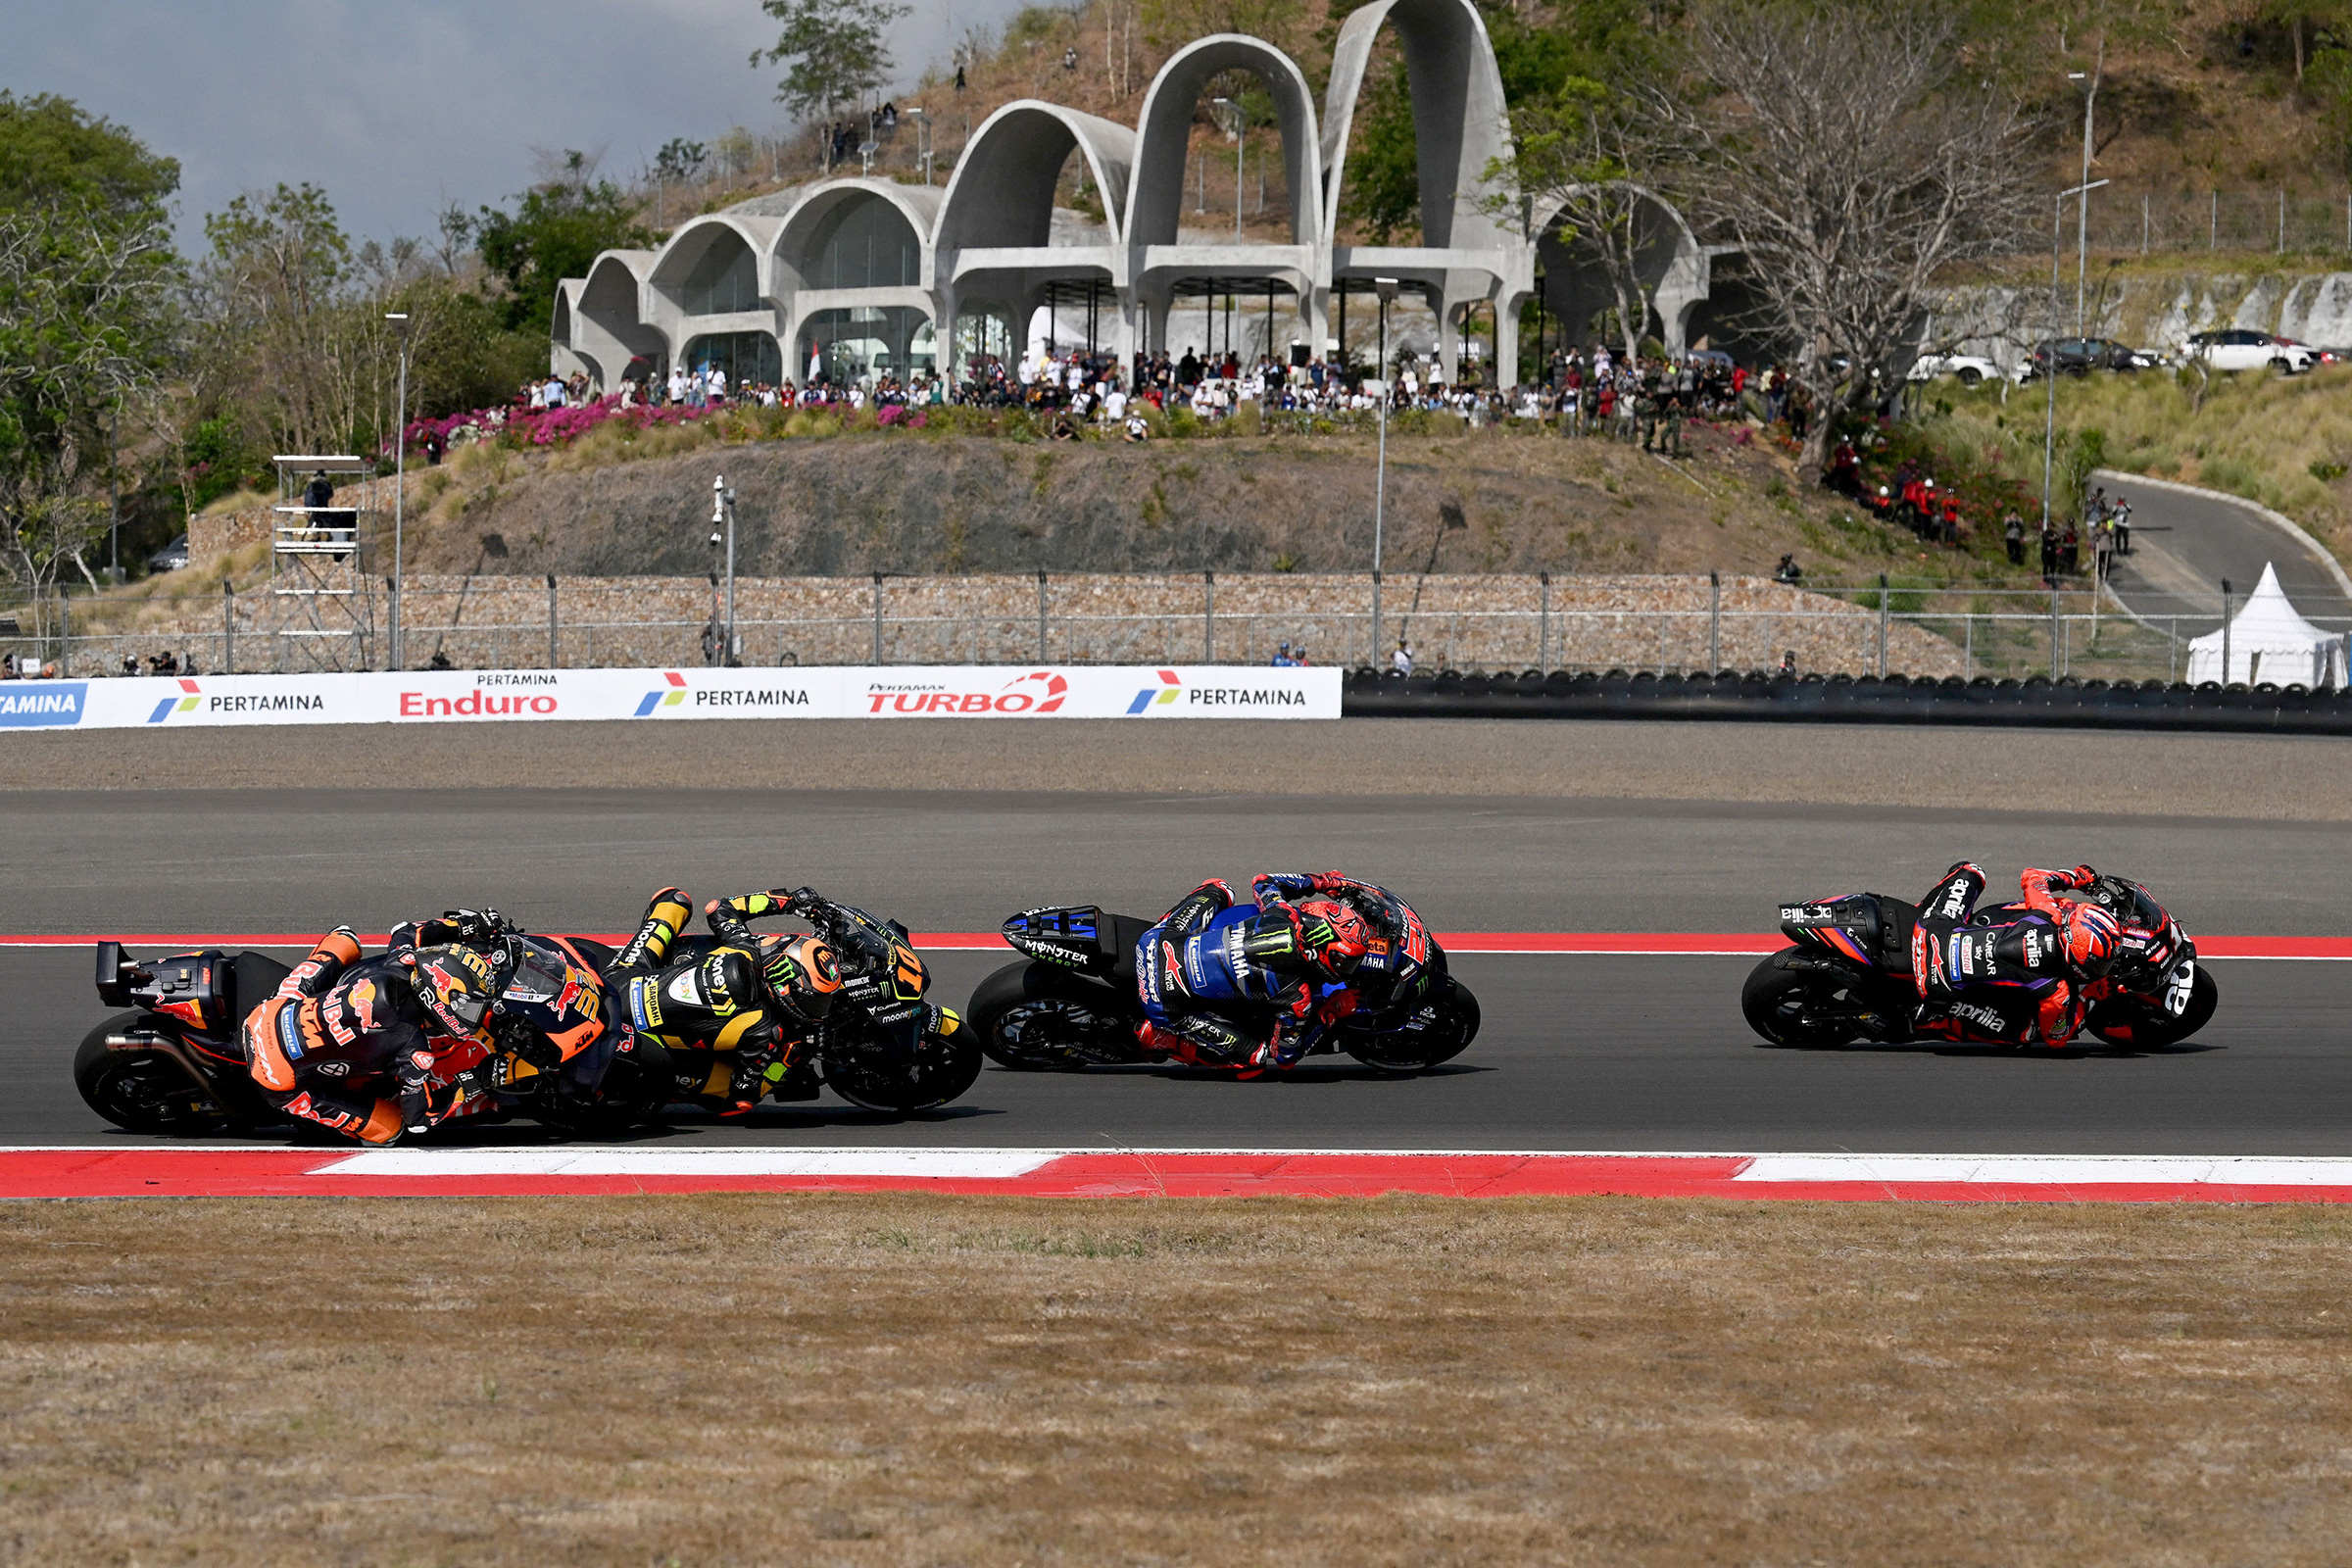 Riders compete in the Indonesian Grand Prix MotoGP at the Mandalika International Circuit in Lombok, Indonesia, on Oct. 15, 2023.